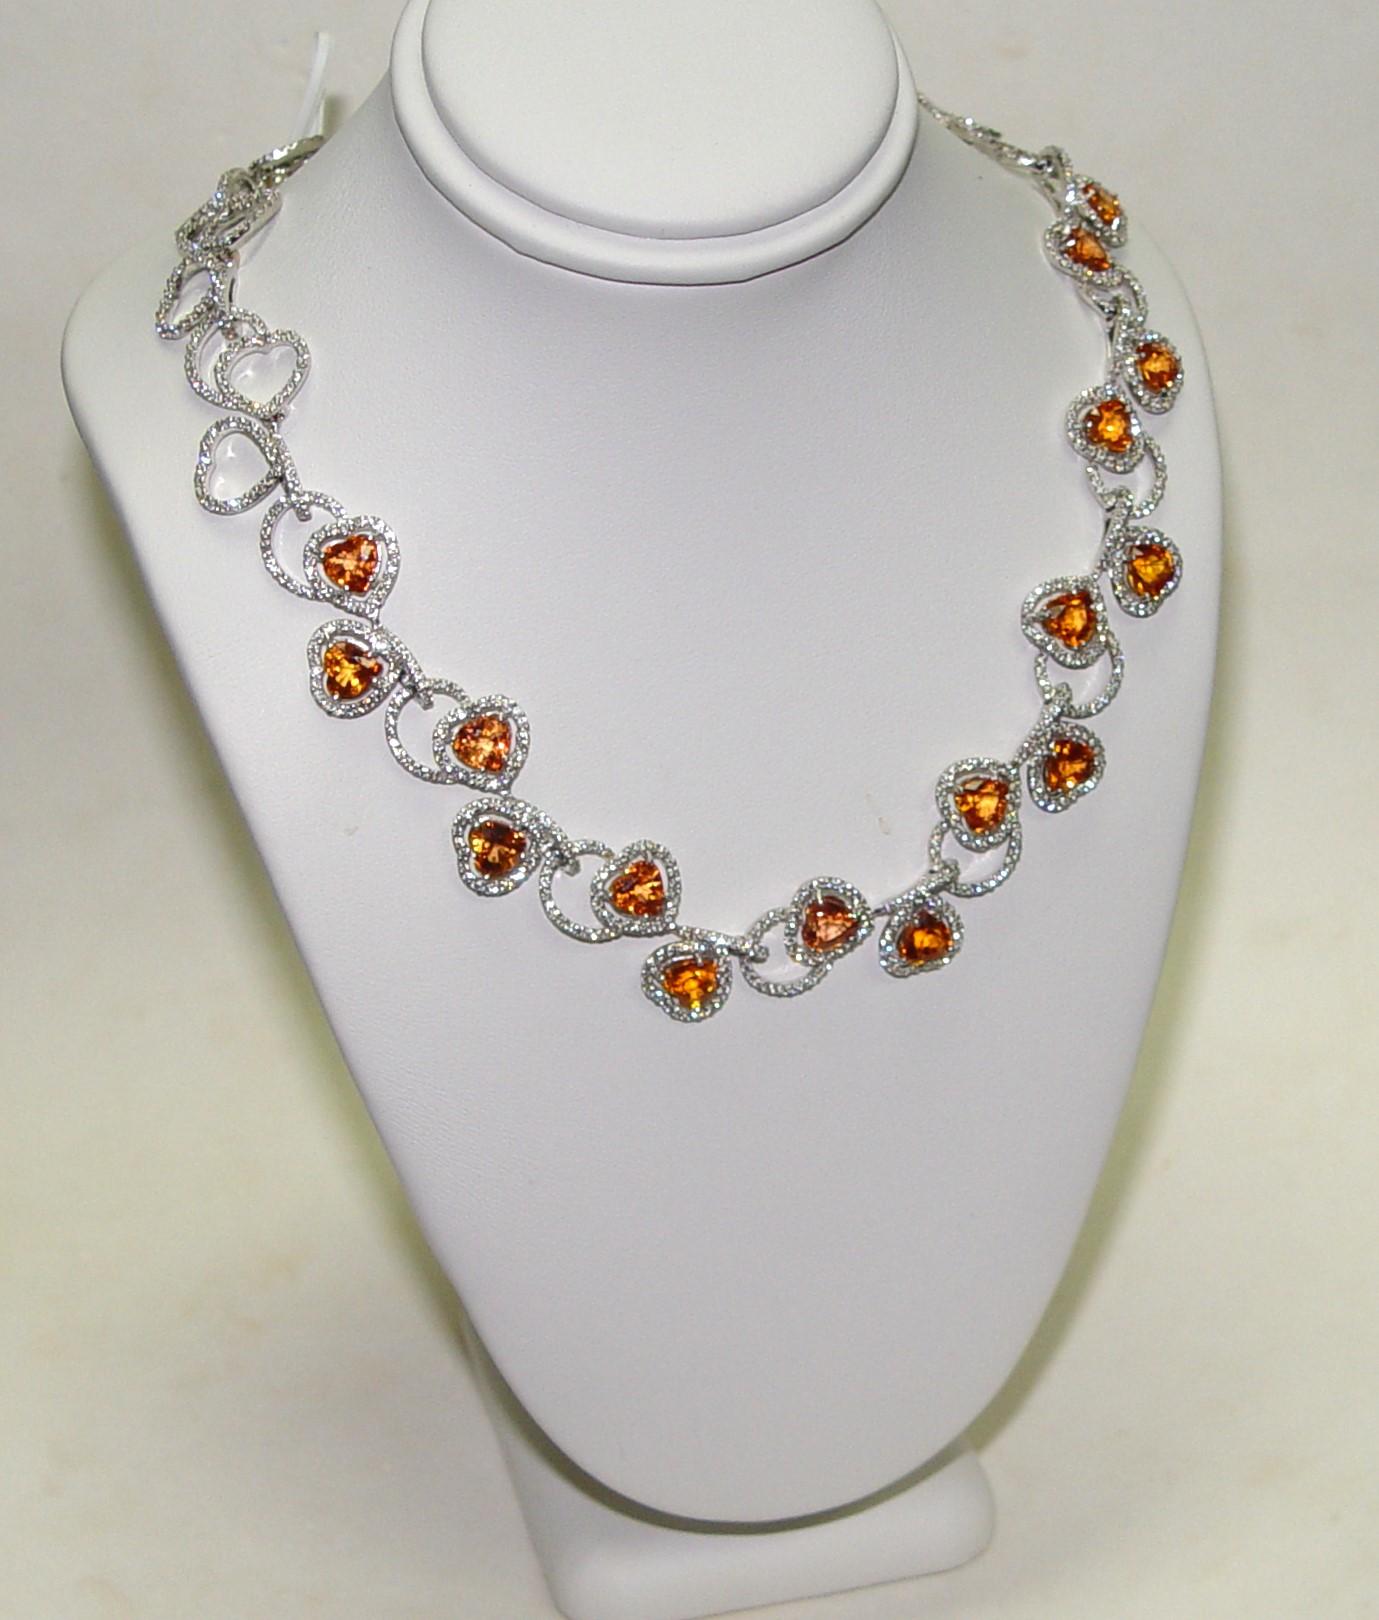 This necklace was evaluated by Christian Dunaigre AG, DUG with C. Dunaigre Consulting GmbH Switzerland. Please check gemstone report # CDC 2303394/1-16 for the details. Necklace set with 16 (estimated 20.00CT) of  Natural Sapphires - ORANGE COLOR,